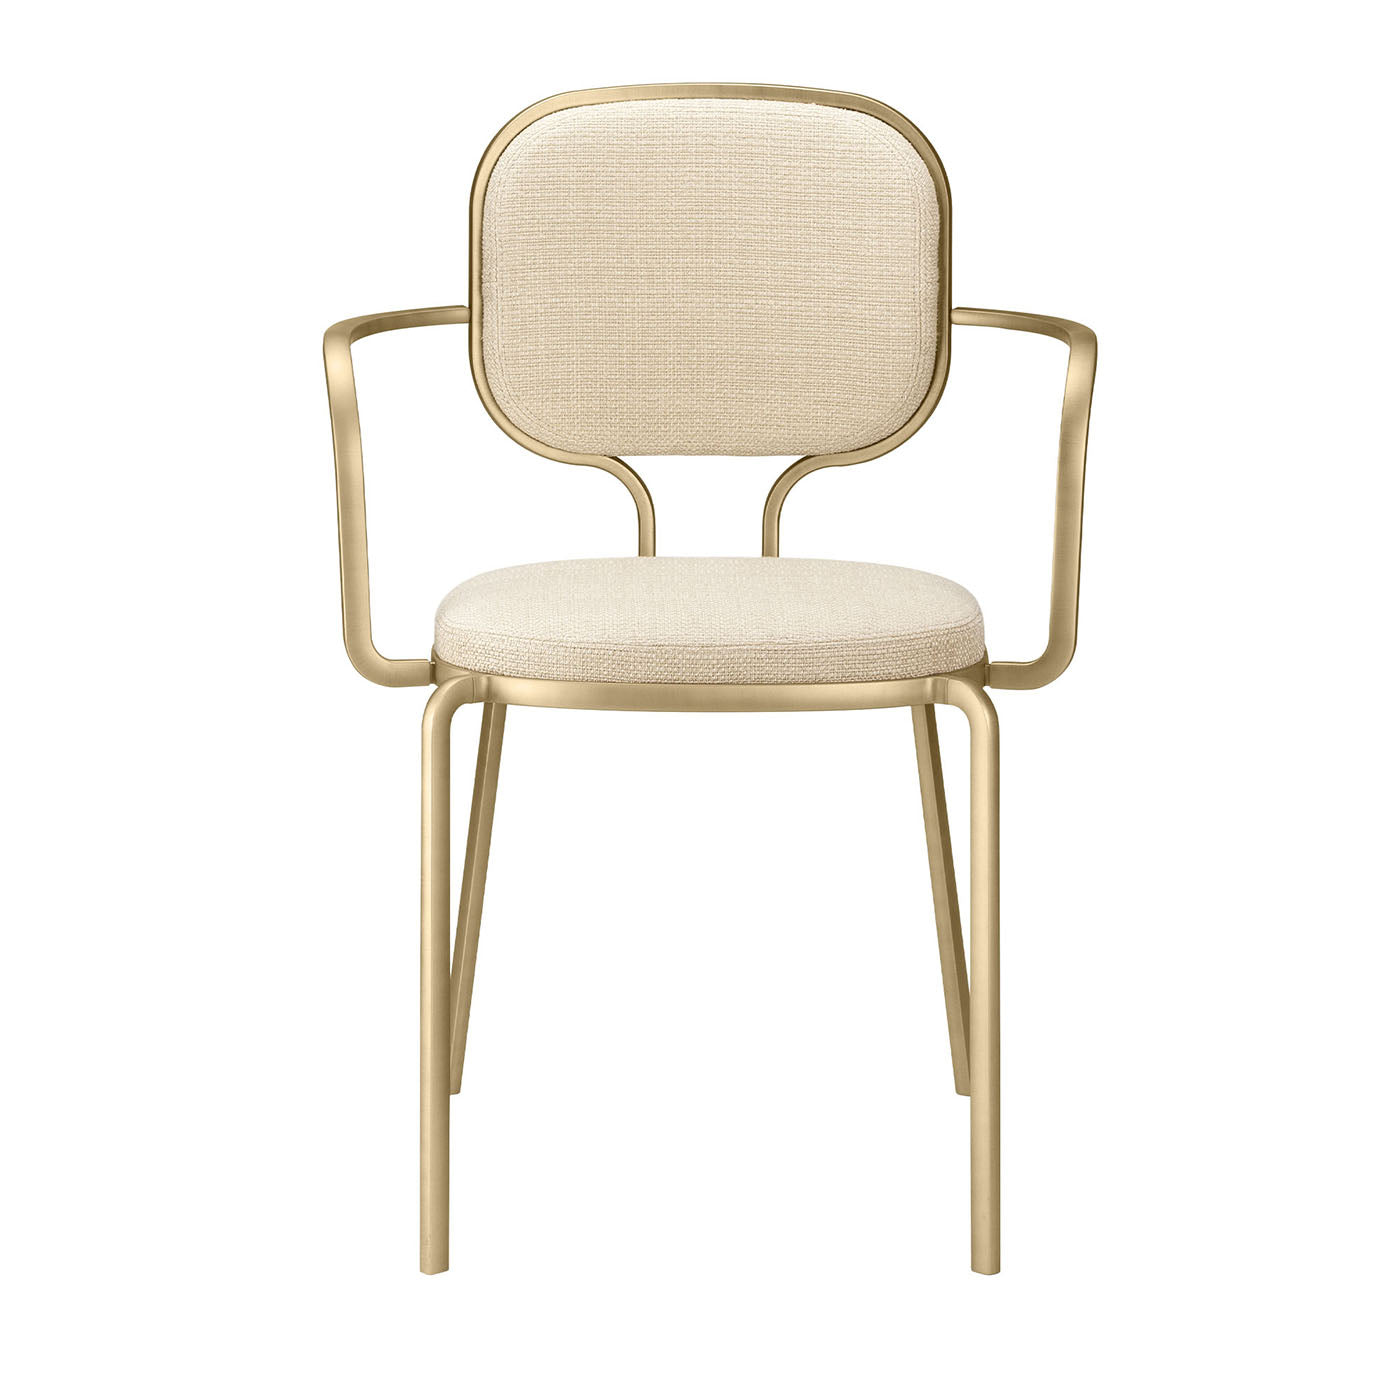 Liù Beige & Brass Armchair by Paolo Rizzatto - Main view